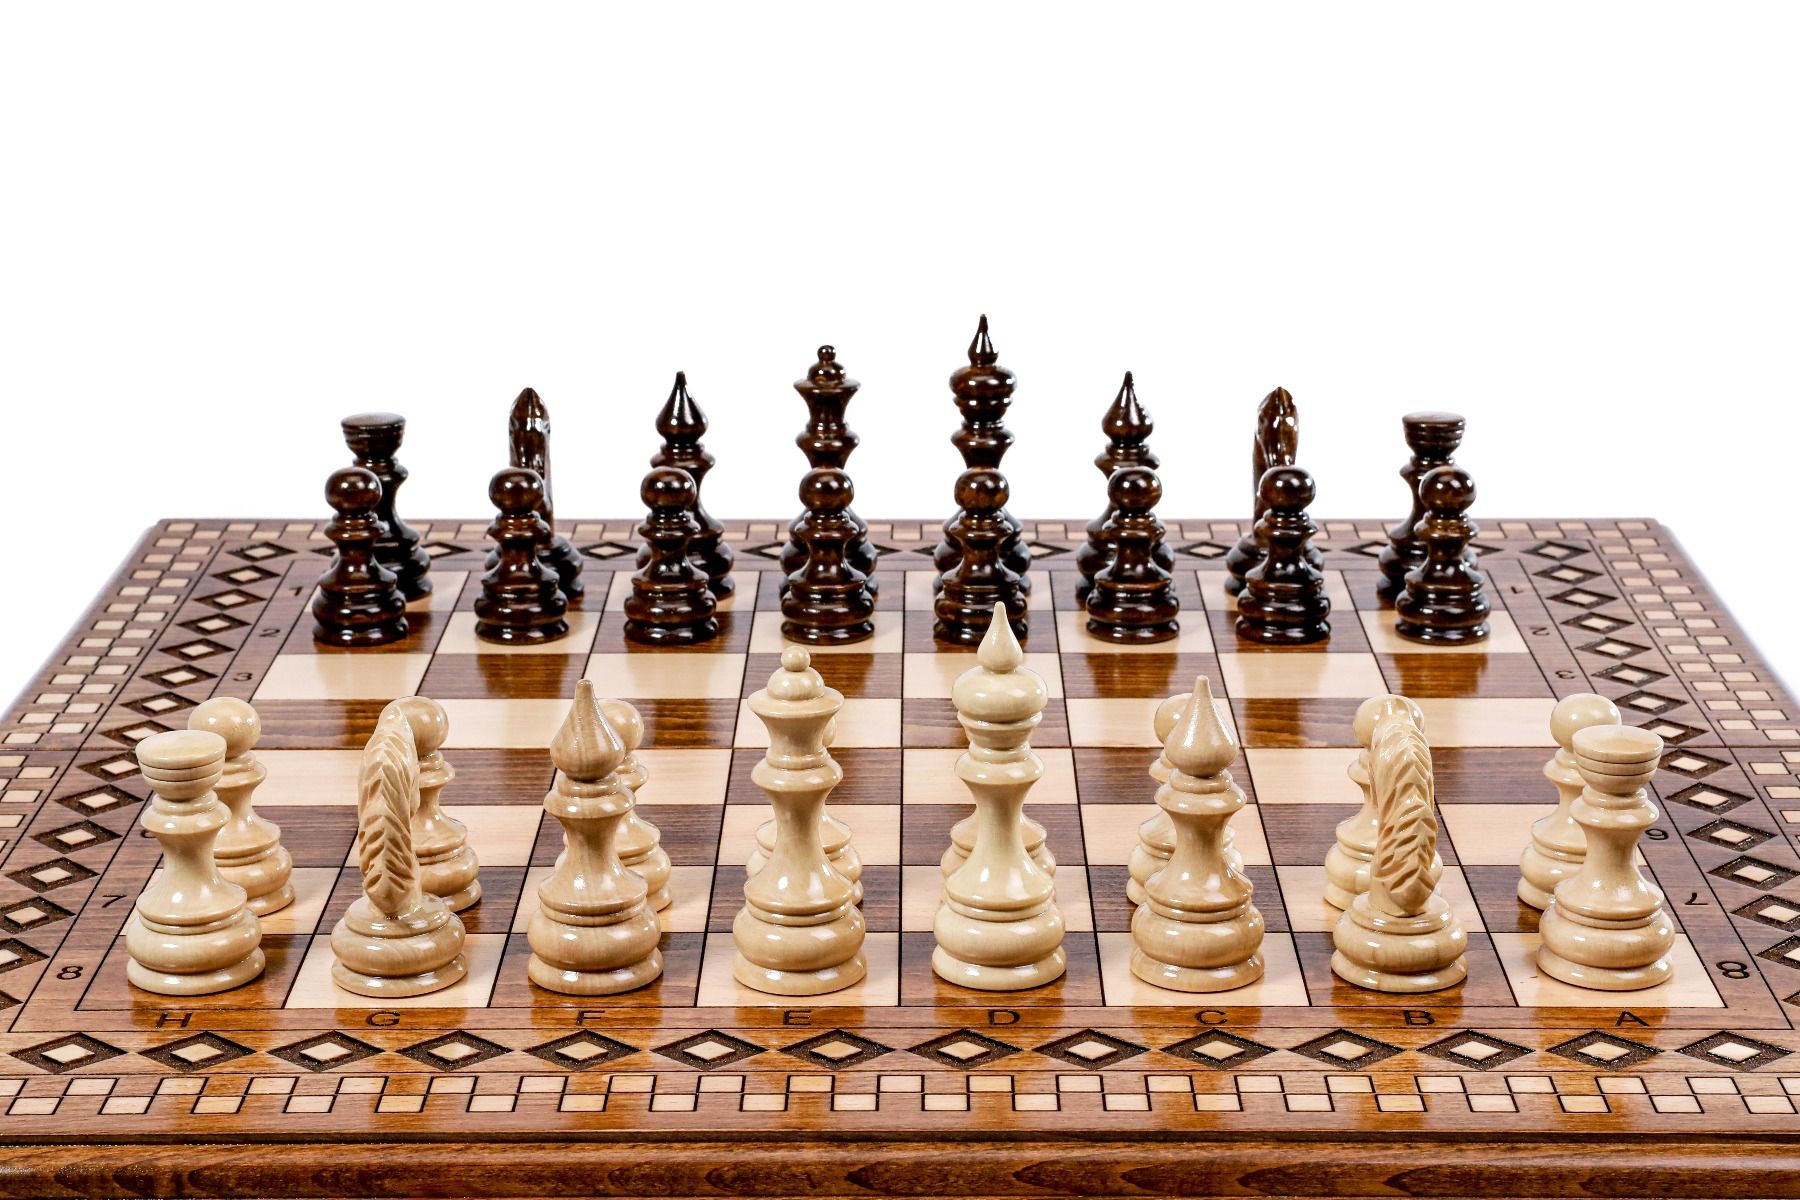 Experience the cultural beauty of a wooden chess set, adorned with Armenian carpet patterns for a truly unique and visually stunning game.